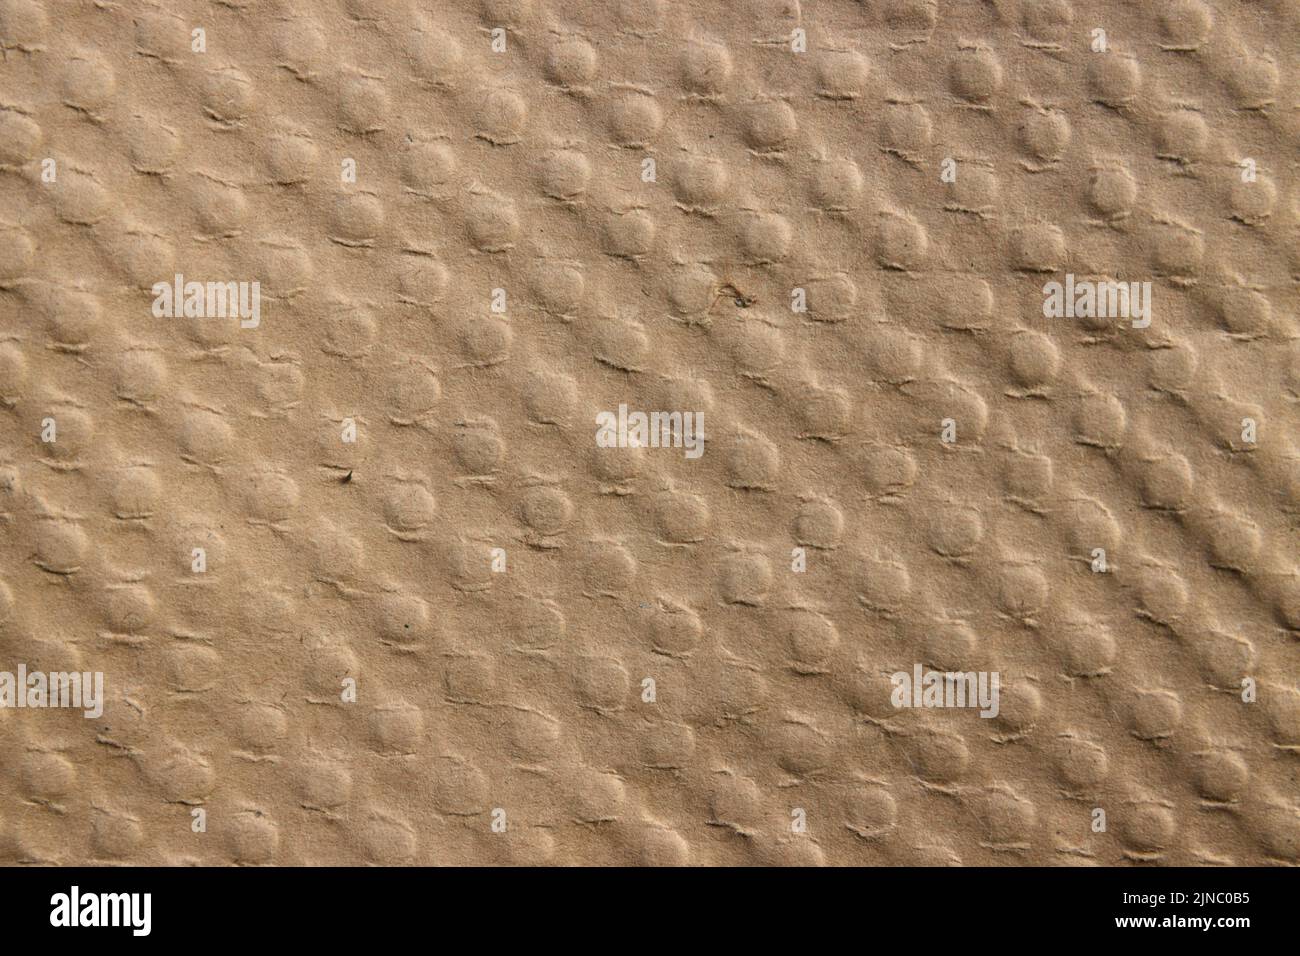 Close-up of a surface of a brown colored cardboard that has a pattern of diagonally aligned buttons Stock Photo